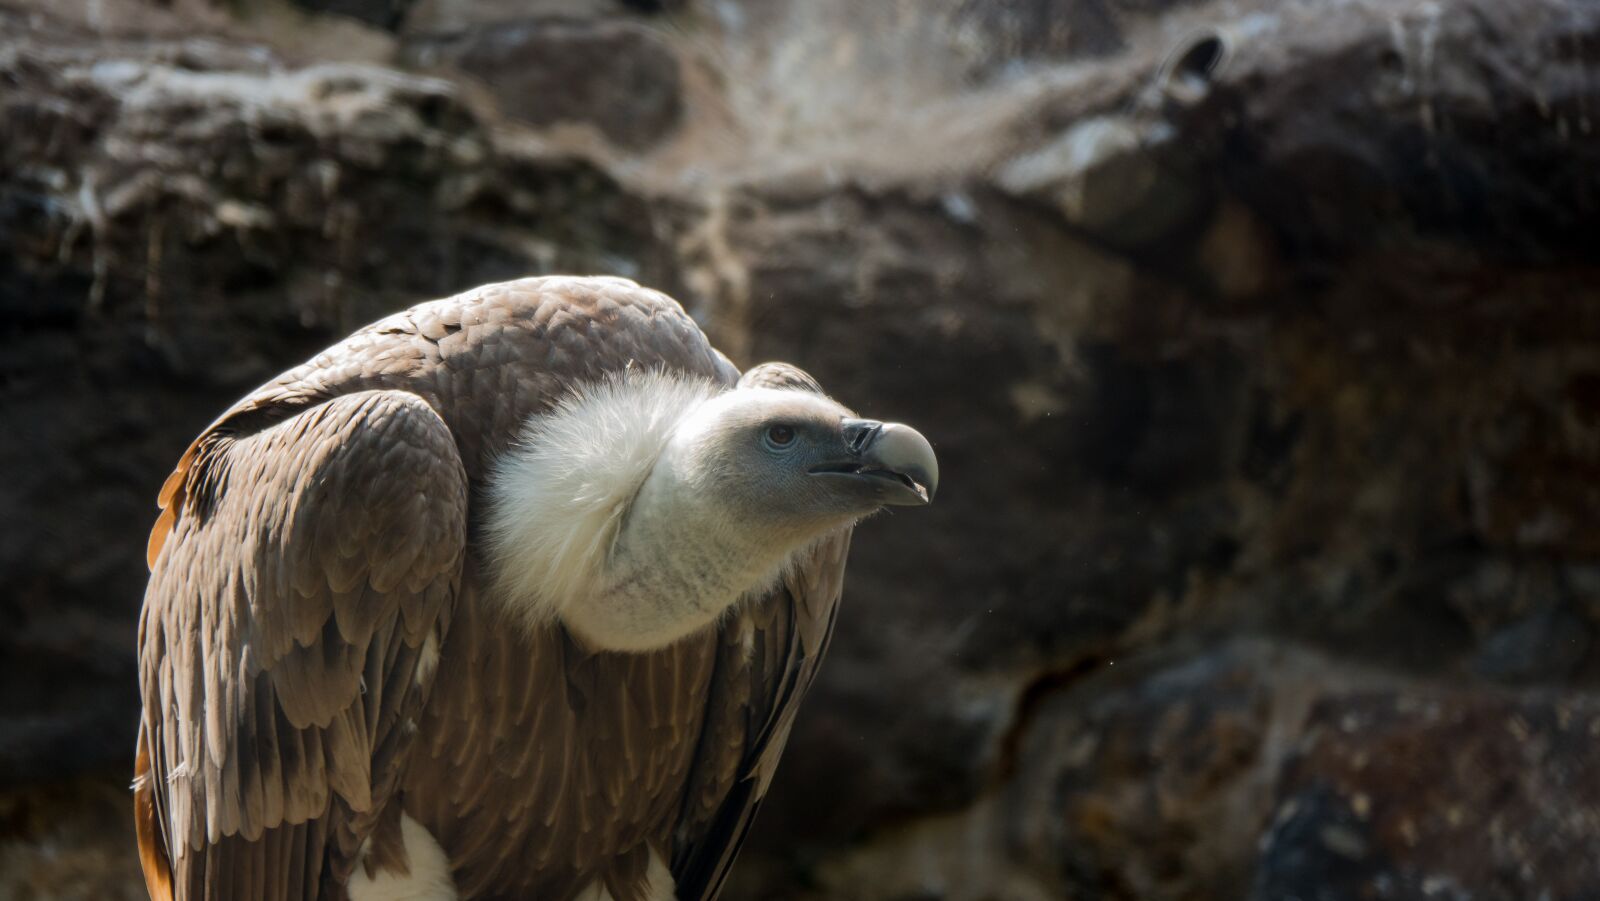 Sony Cyber-shot DSC-RX10 IV sample photo. Vulture, zoo, zoo photography photography